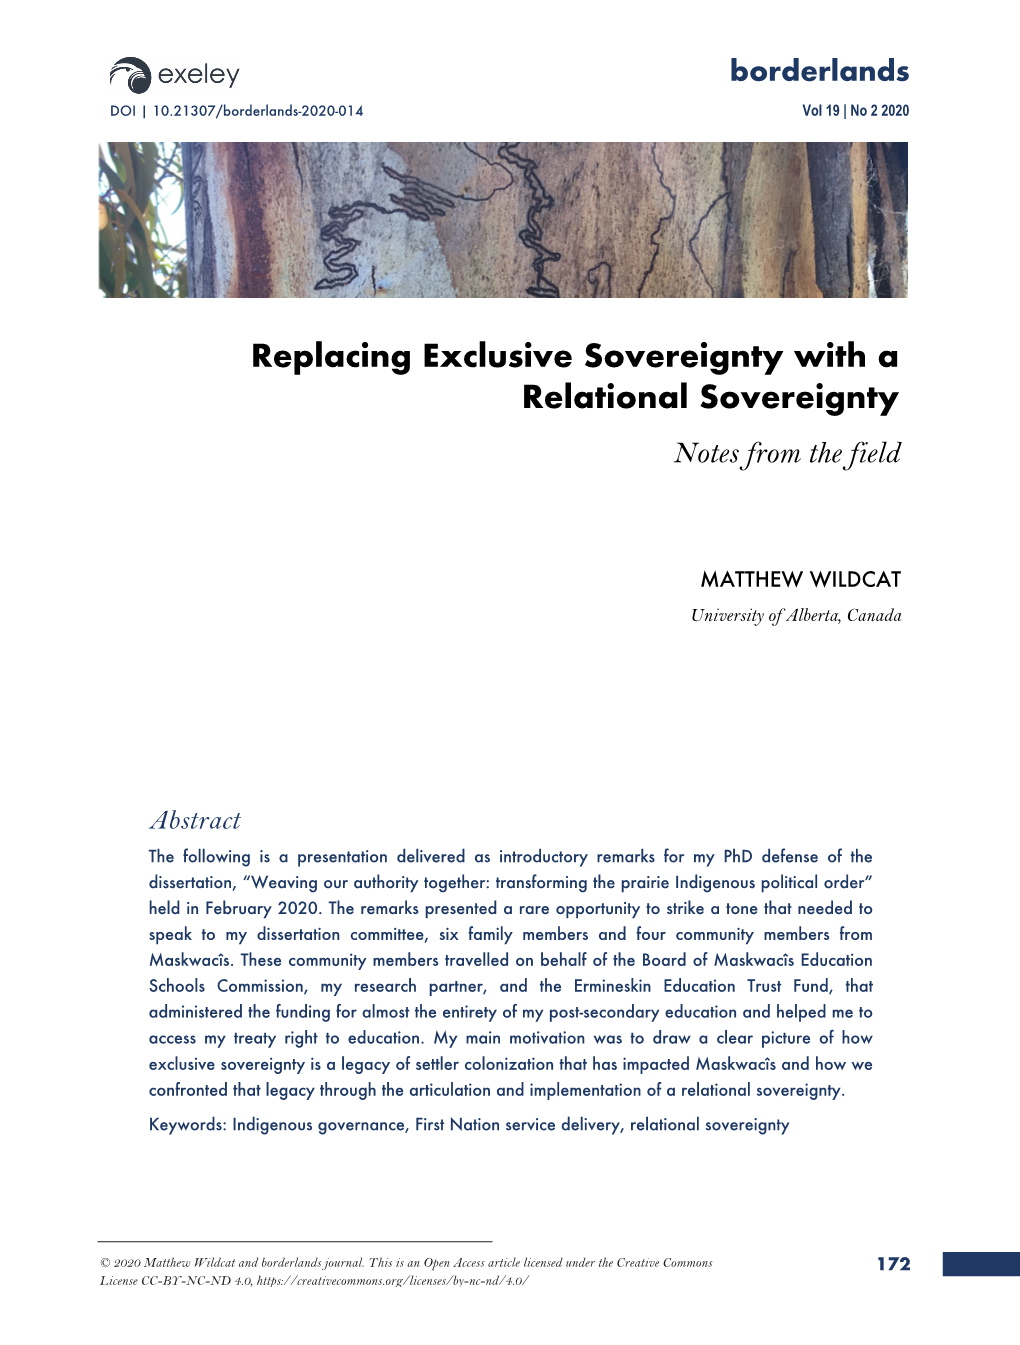 Replacing Exclusive Sovereignty with a Relational Sovereignty